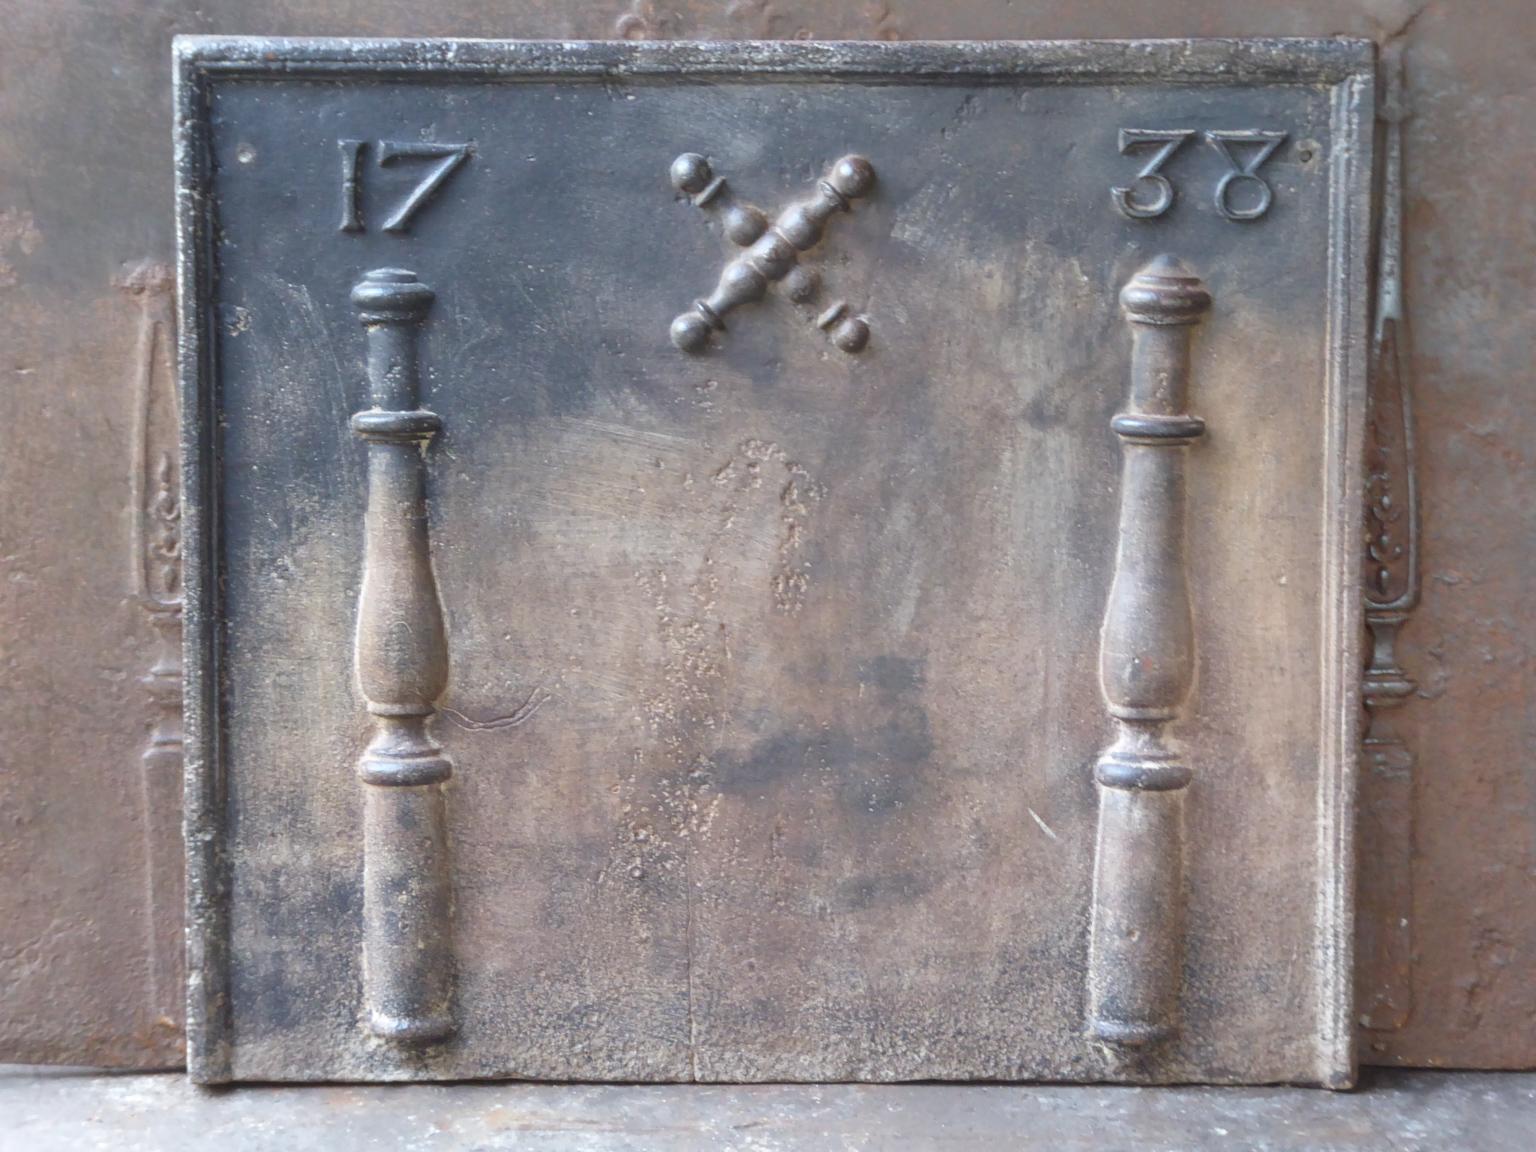 18th century French Louis XV fireback with two pillars, a cross, and the date of production 1738. The pillars refer to the club of Hercules and symbolize strength and the unknown. The cross refers to Saint Andrew's Cross. Saint Andrew is said to